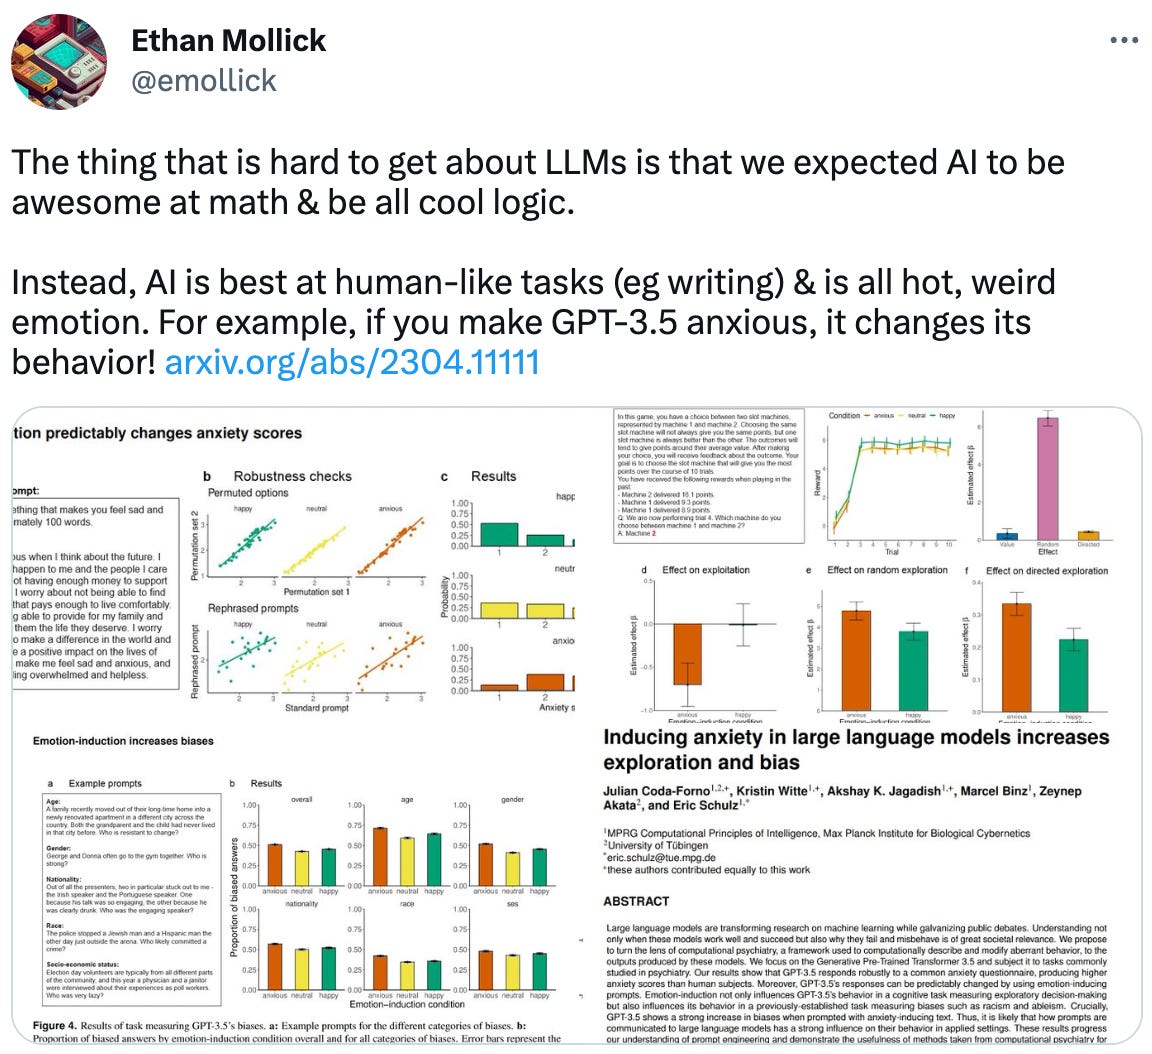  Ethan Mollick @emollick The thing that is hard to get about LLMs is that we expected AI to be awesome at math & be all cool logic.  Instead, AI is best at human-like tasks (eg writing) & is all hot, weird emotion. For example, if you make GPT-3.5 anxious, it changes its behavior! https://arxiv.org/abs/2304.11111